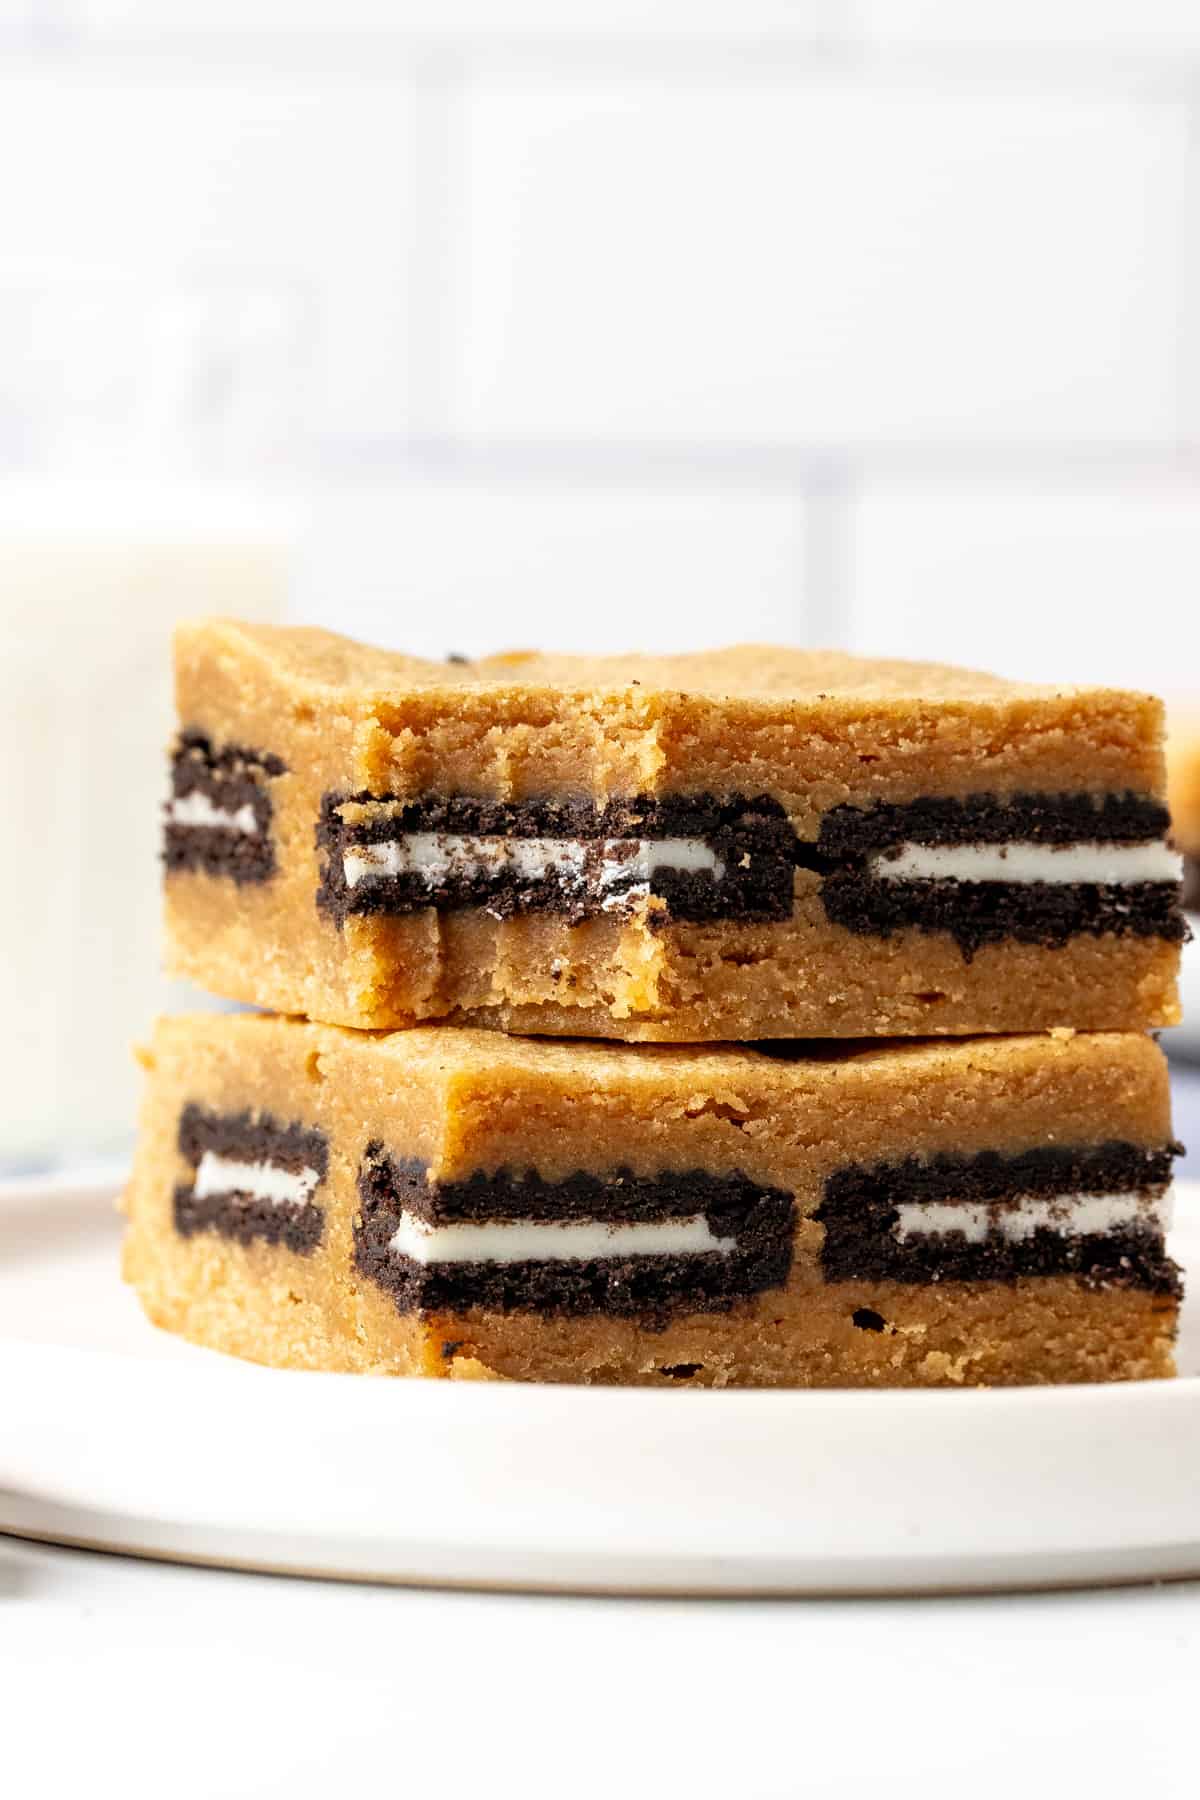 Two peanut butter Oreo blondies, one on top of each other on a plate.